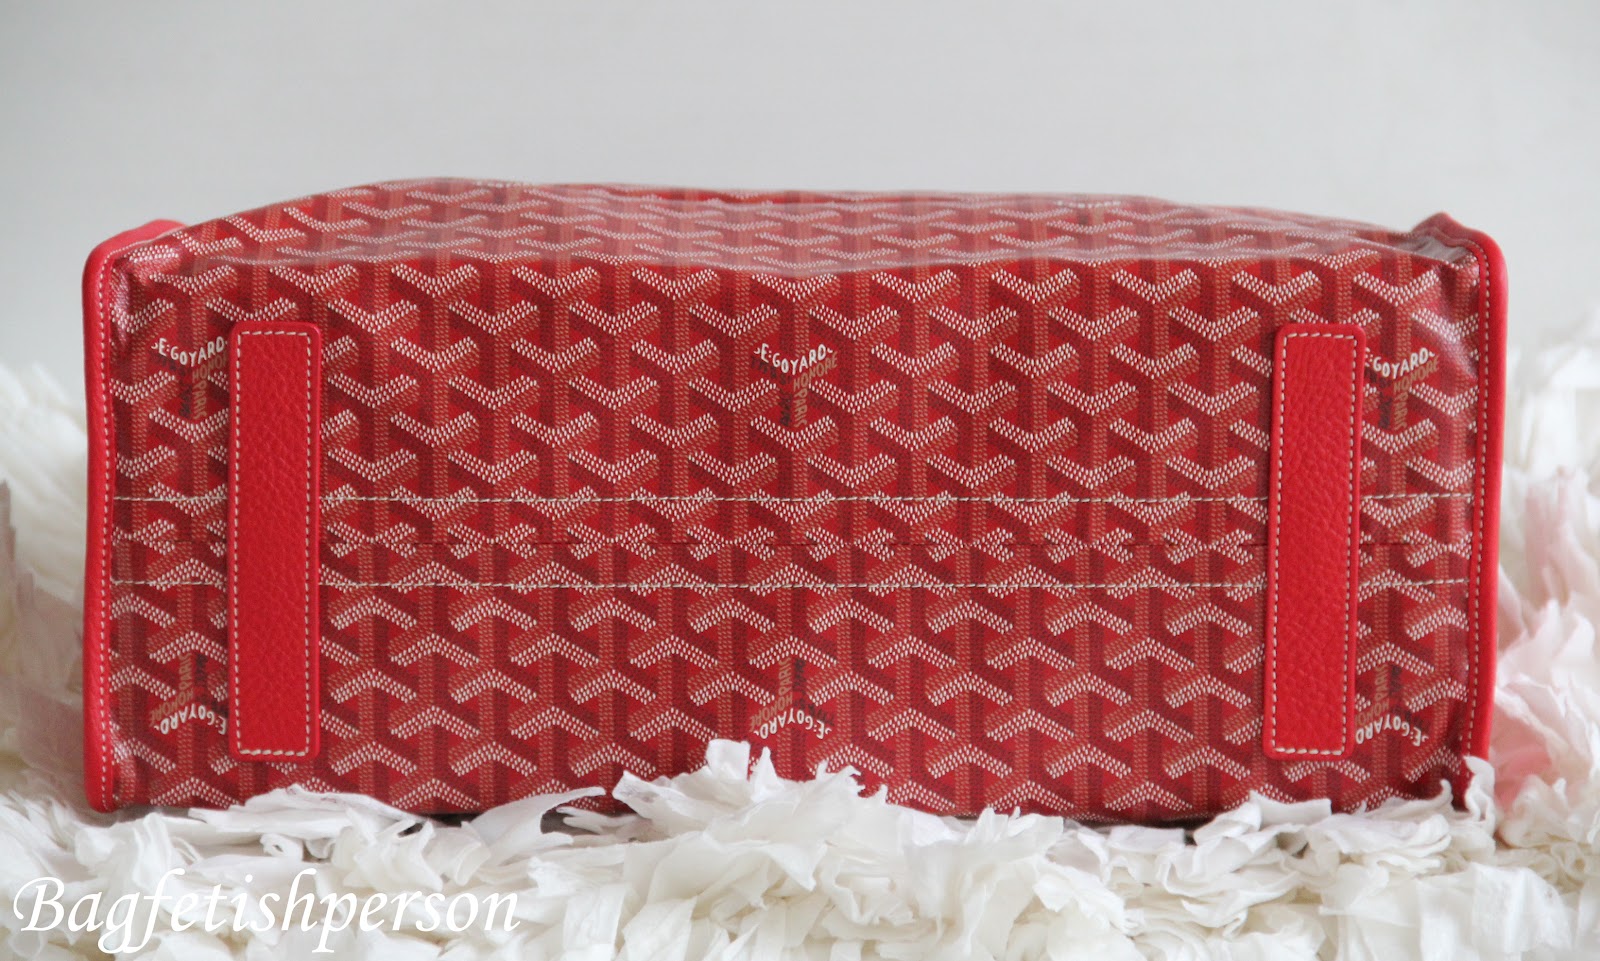 bagfetishperson: Bag of the day: Goyard Hardy PM Red